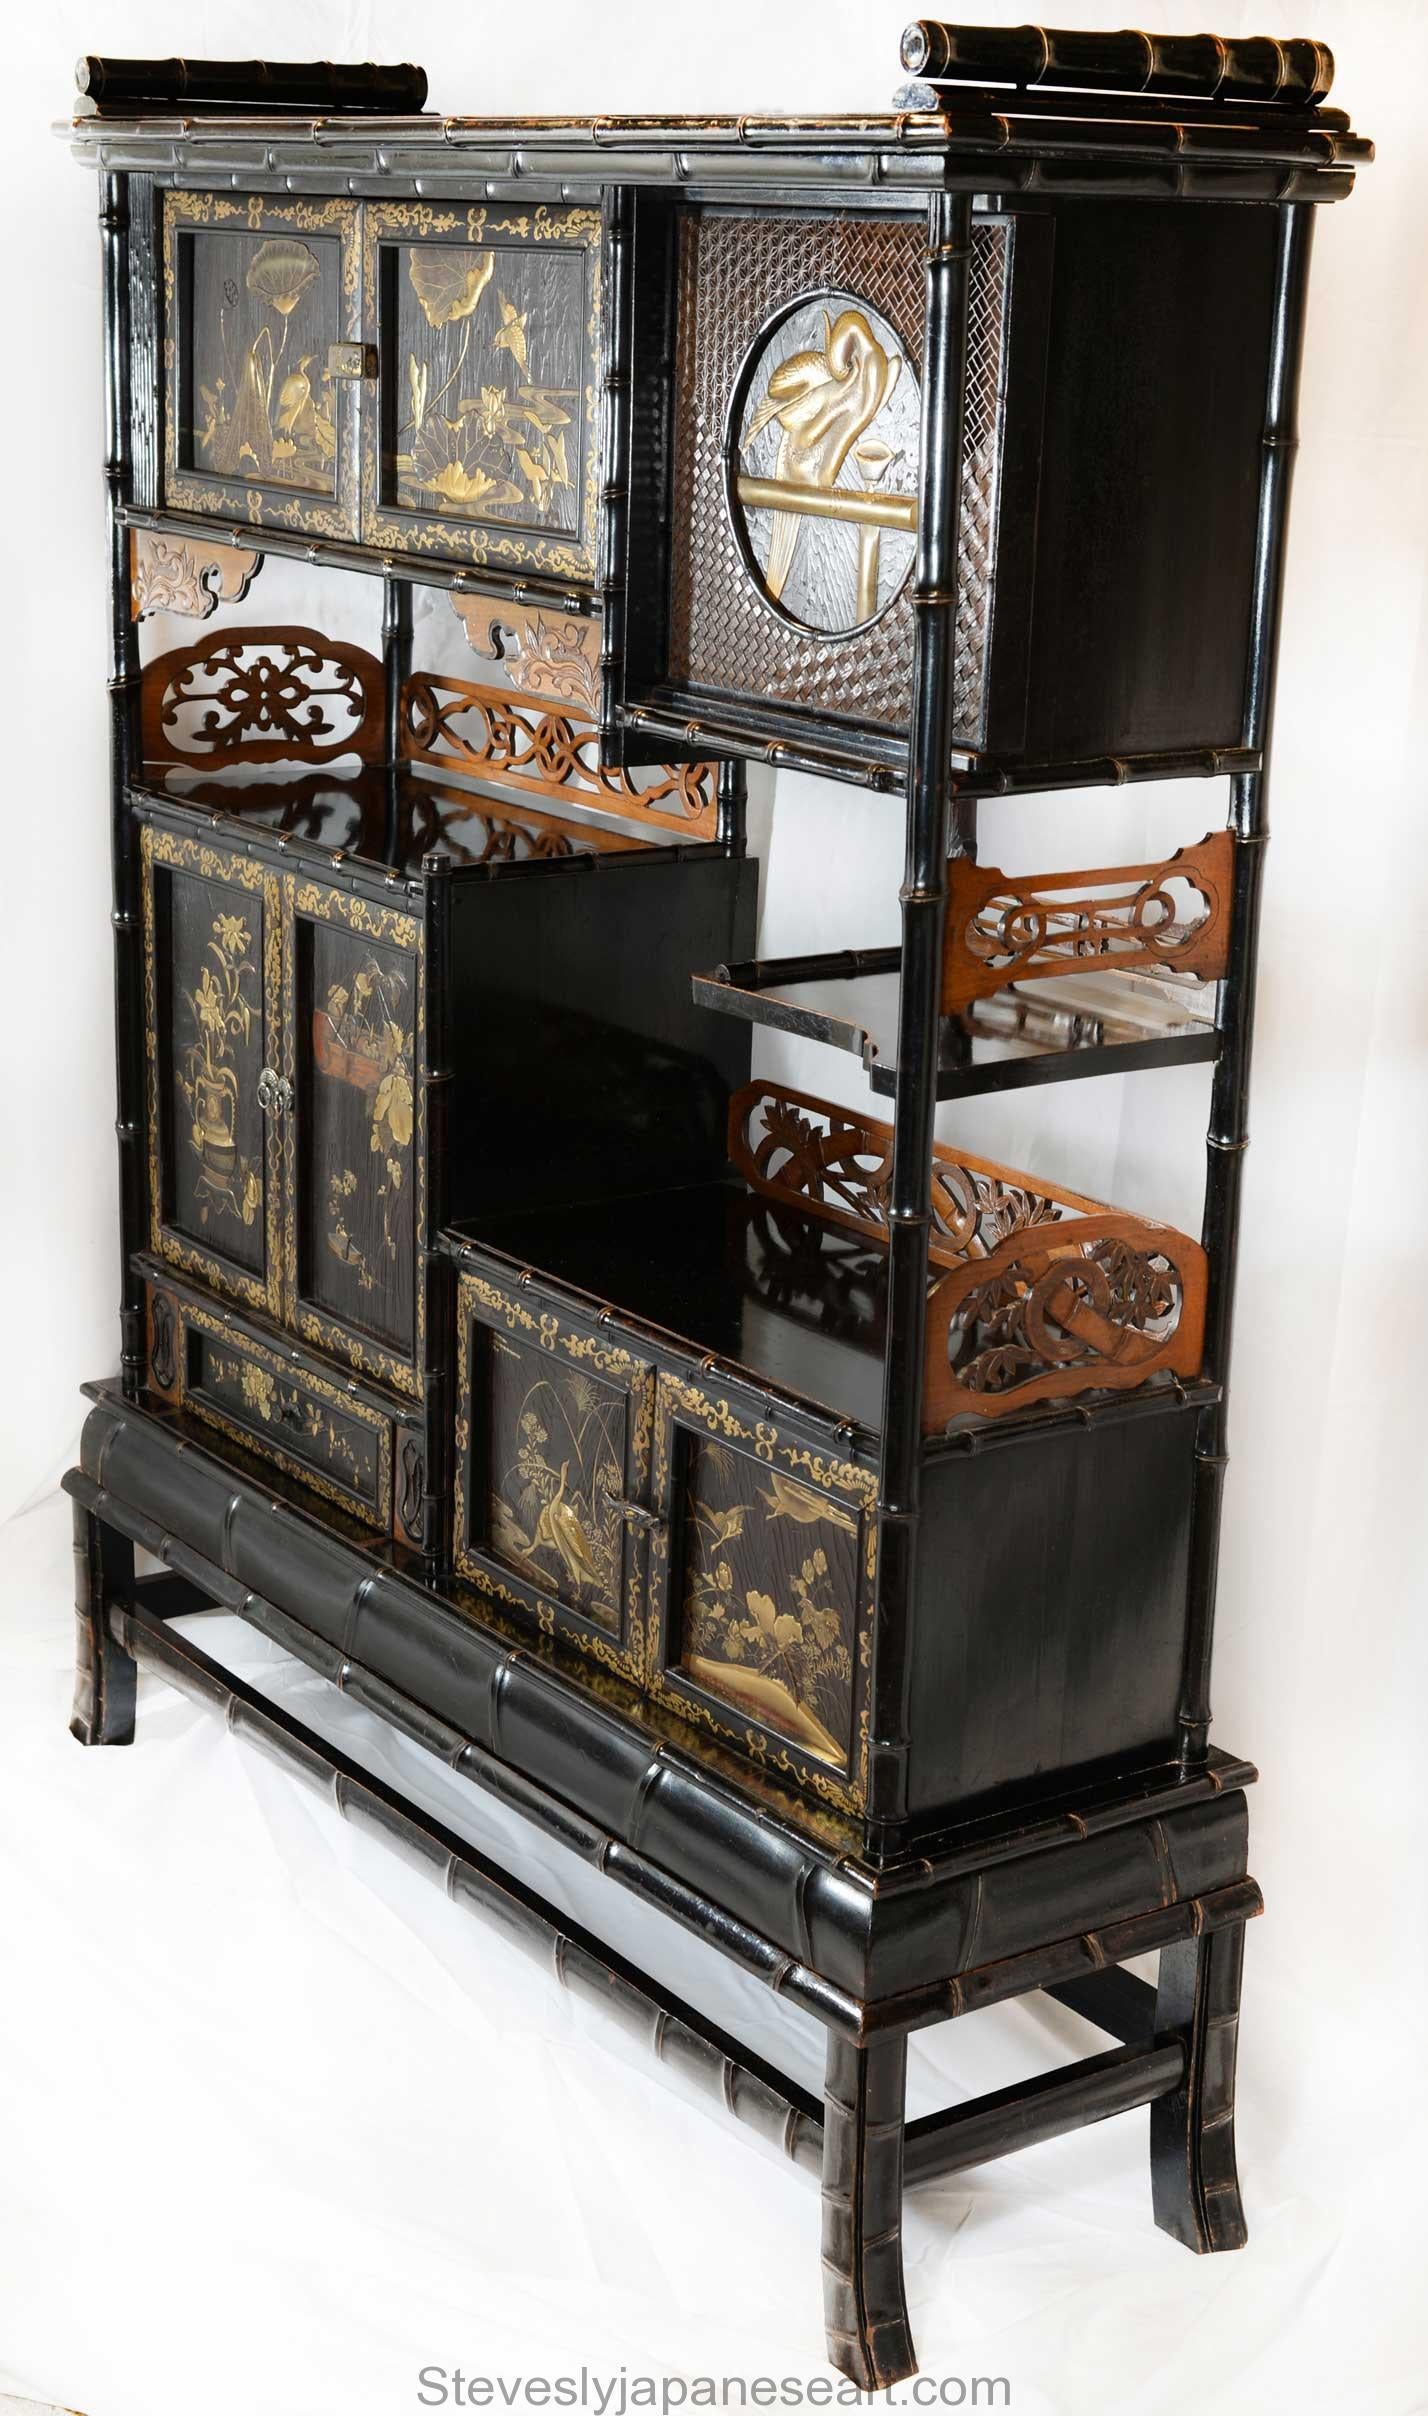 As part of our Japanese works of art collection we are delighted to offer this fine quality Meiji period 1868-1912, circa 1890 Kazaridana (display cabinet), the black lacquered hardwood cabinet stands upon a separate base formed as simulated bamboo,